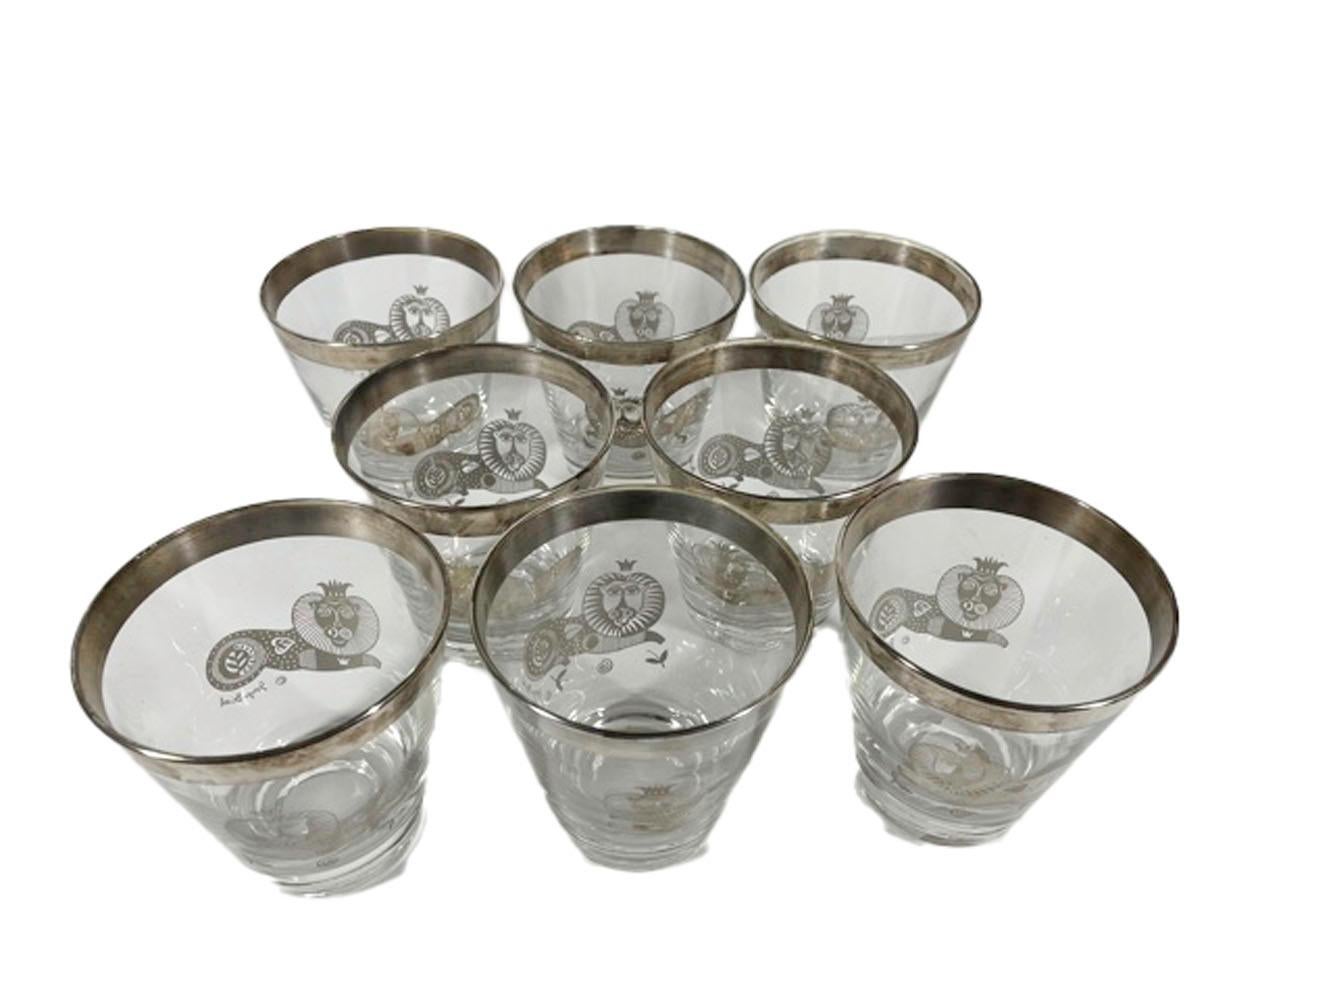 Signed set of 8 Georges Briard double old fashioned glasses with a silver rim above stylized images of recumbent lions wearing crowns.